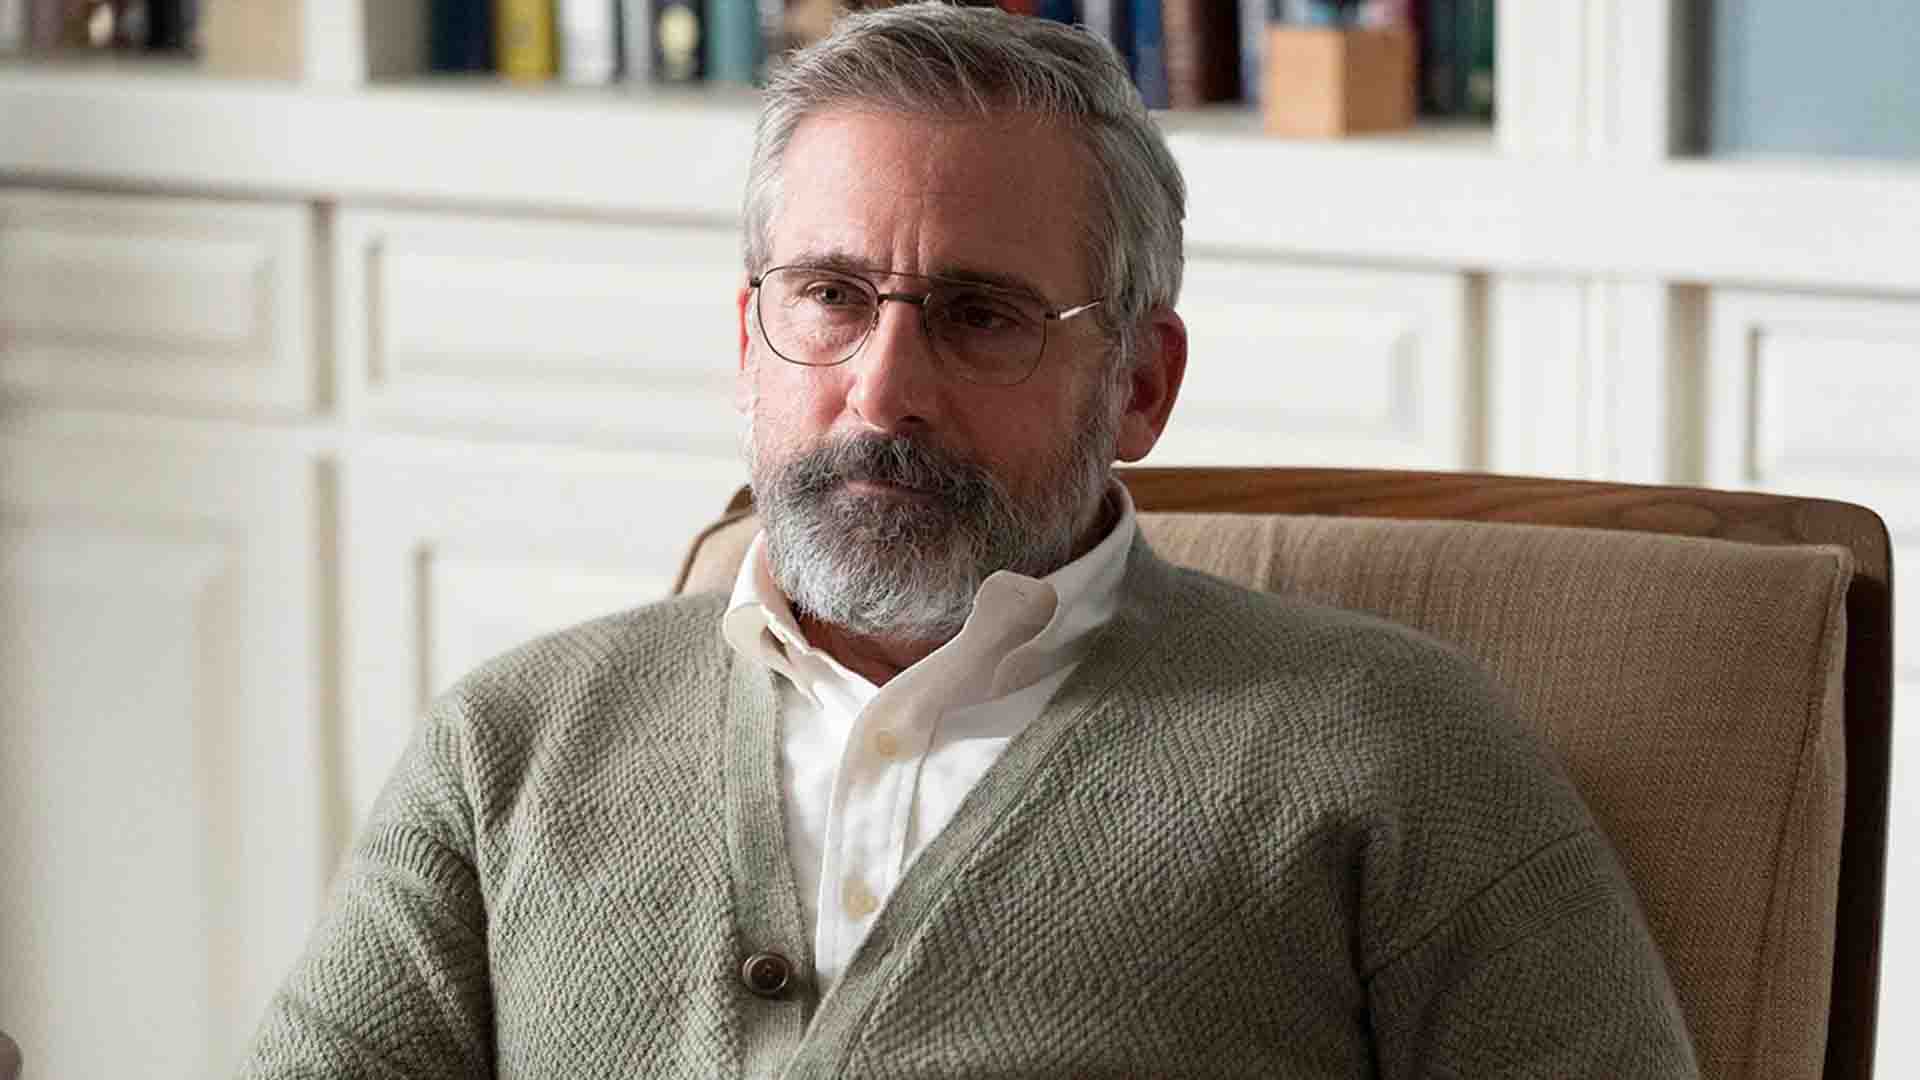 Steve Carell counseling a patient in The Patient series